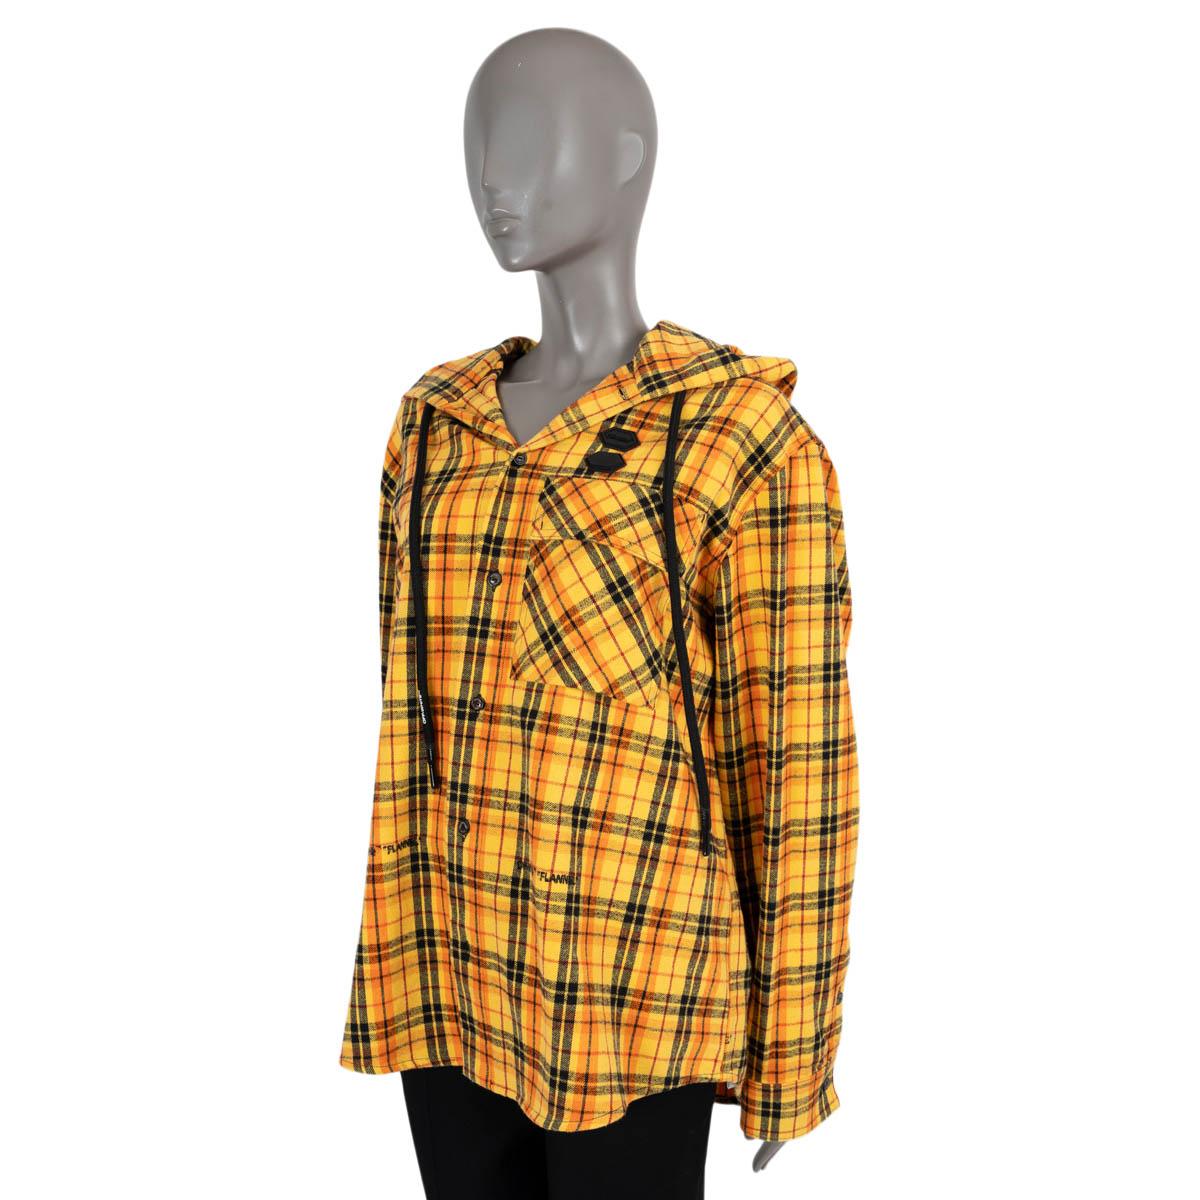 100% authentic OFF-WHITE flannel hooded button-up shirt in yellow, orange, red and black check cotton (75%), polyester (20%), viscose (3%) and acrylic (2%). Features an oversized fit, tonal arrow logo on the back, black rubber patches and flap